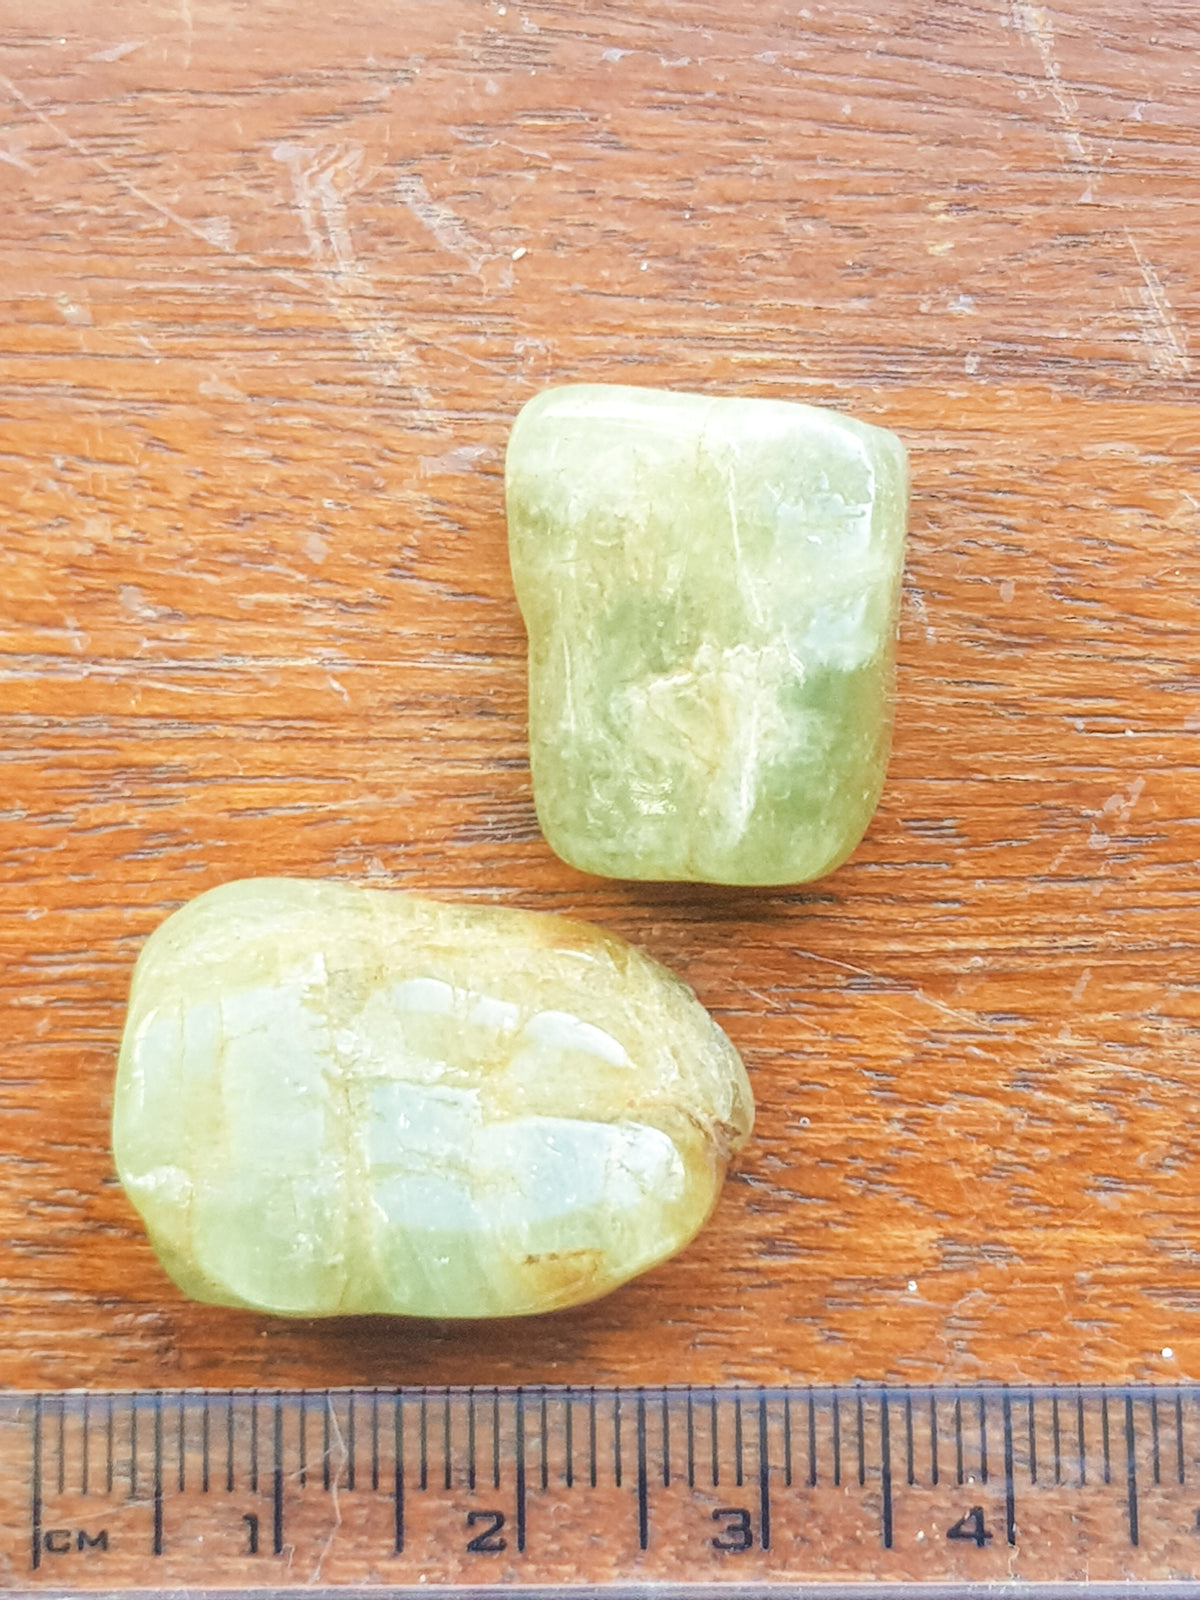 two green aquamarine tumblestones. They are placed against a ruler for scale. They are about 2.5cm long.